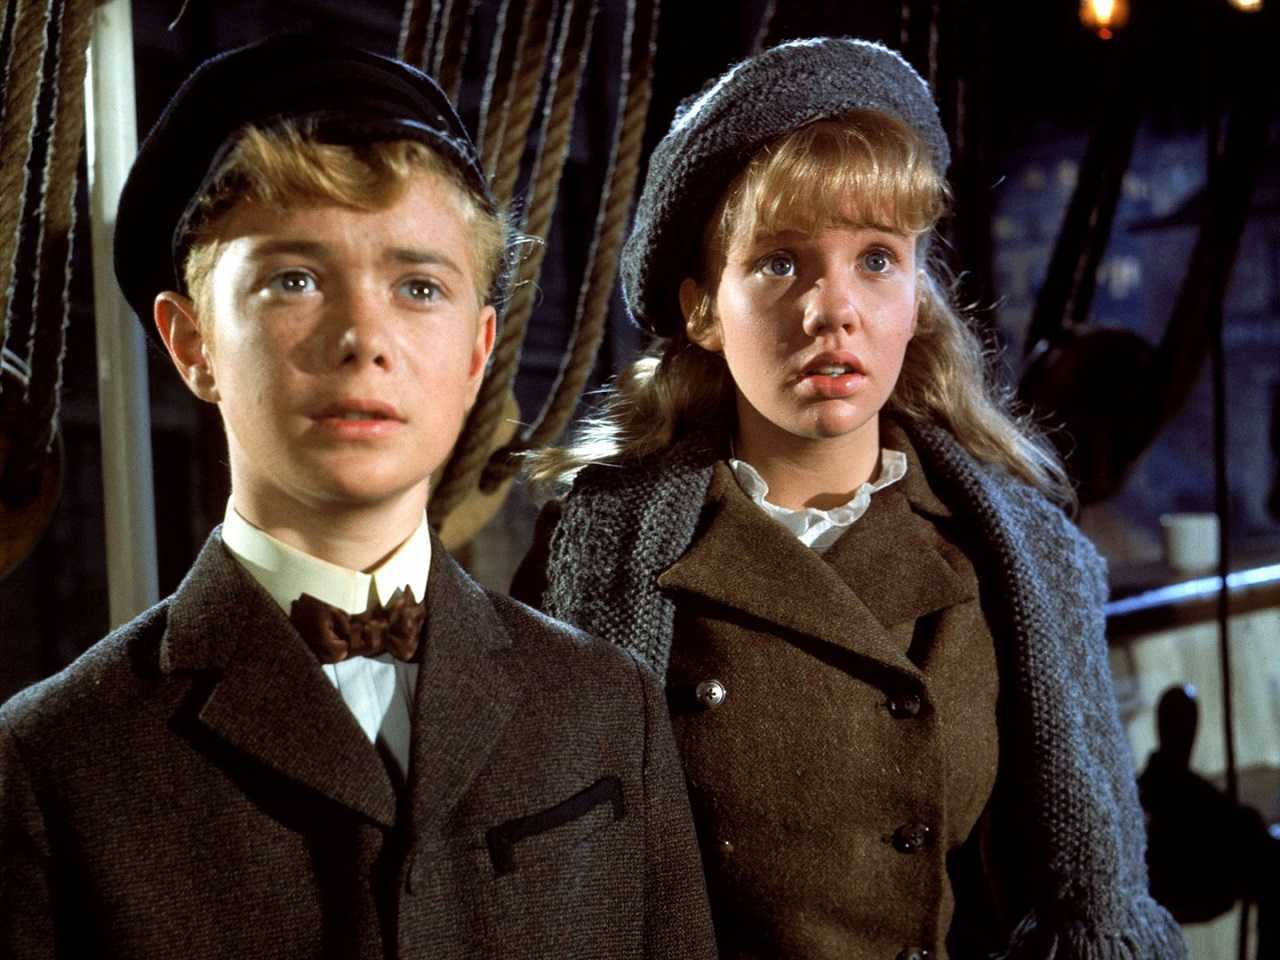 Brother and sister Robert and Mary Grant (Keith Hamshire and Hayley Mills) in In Search of the Castaways (1962)